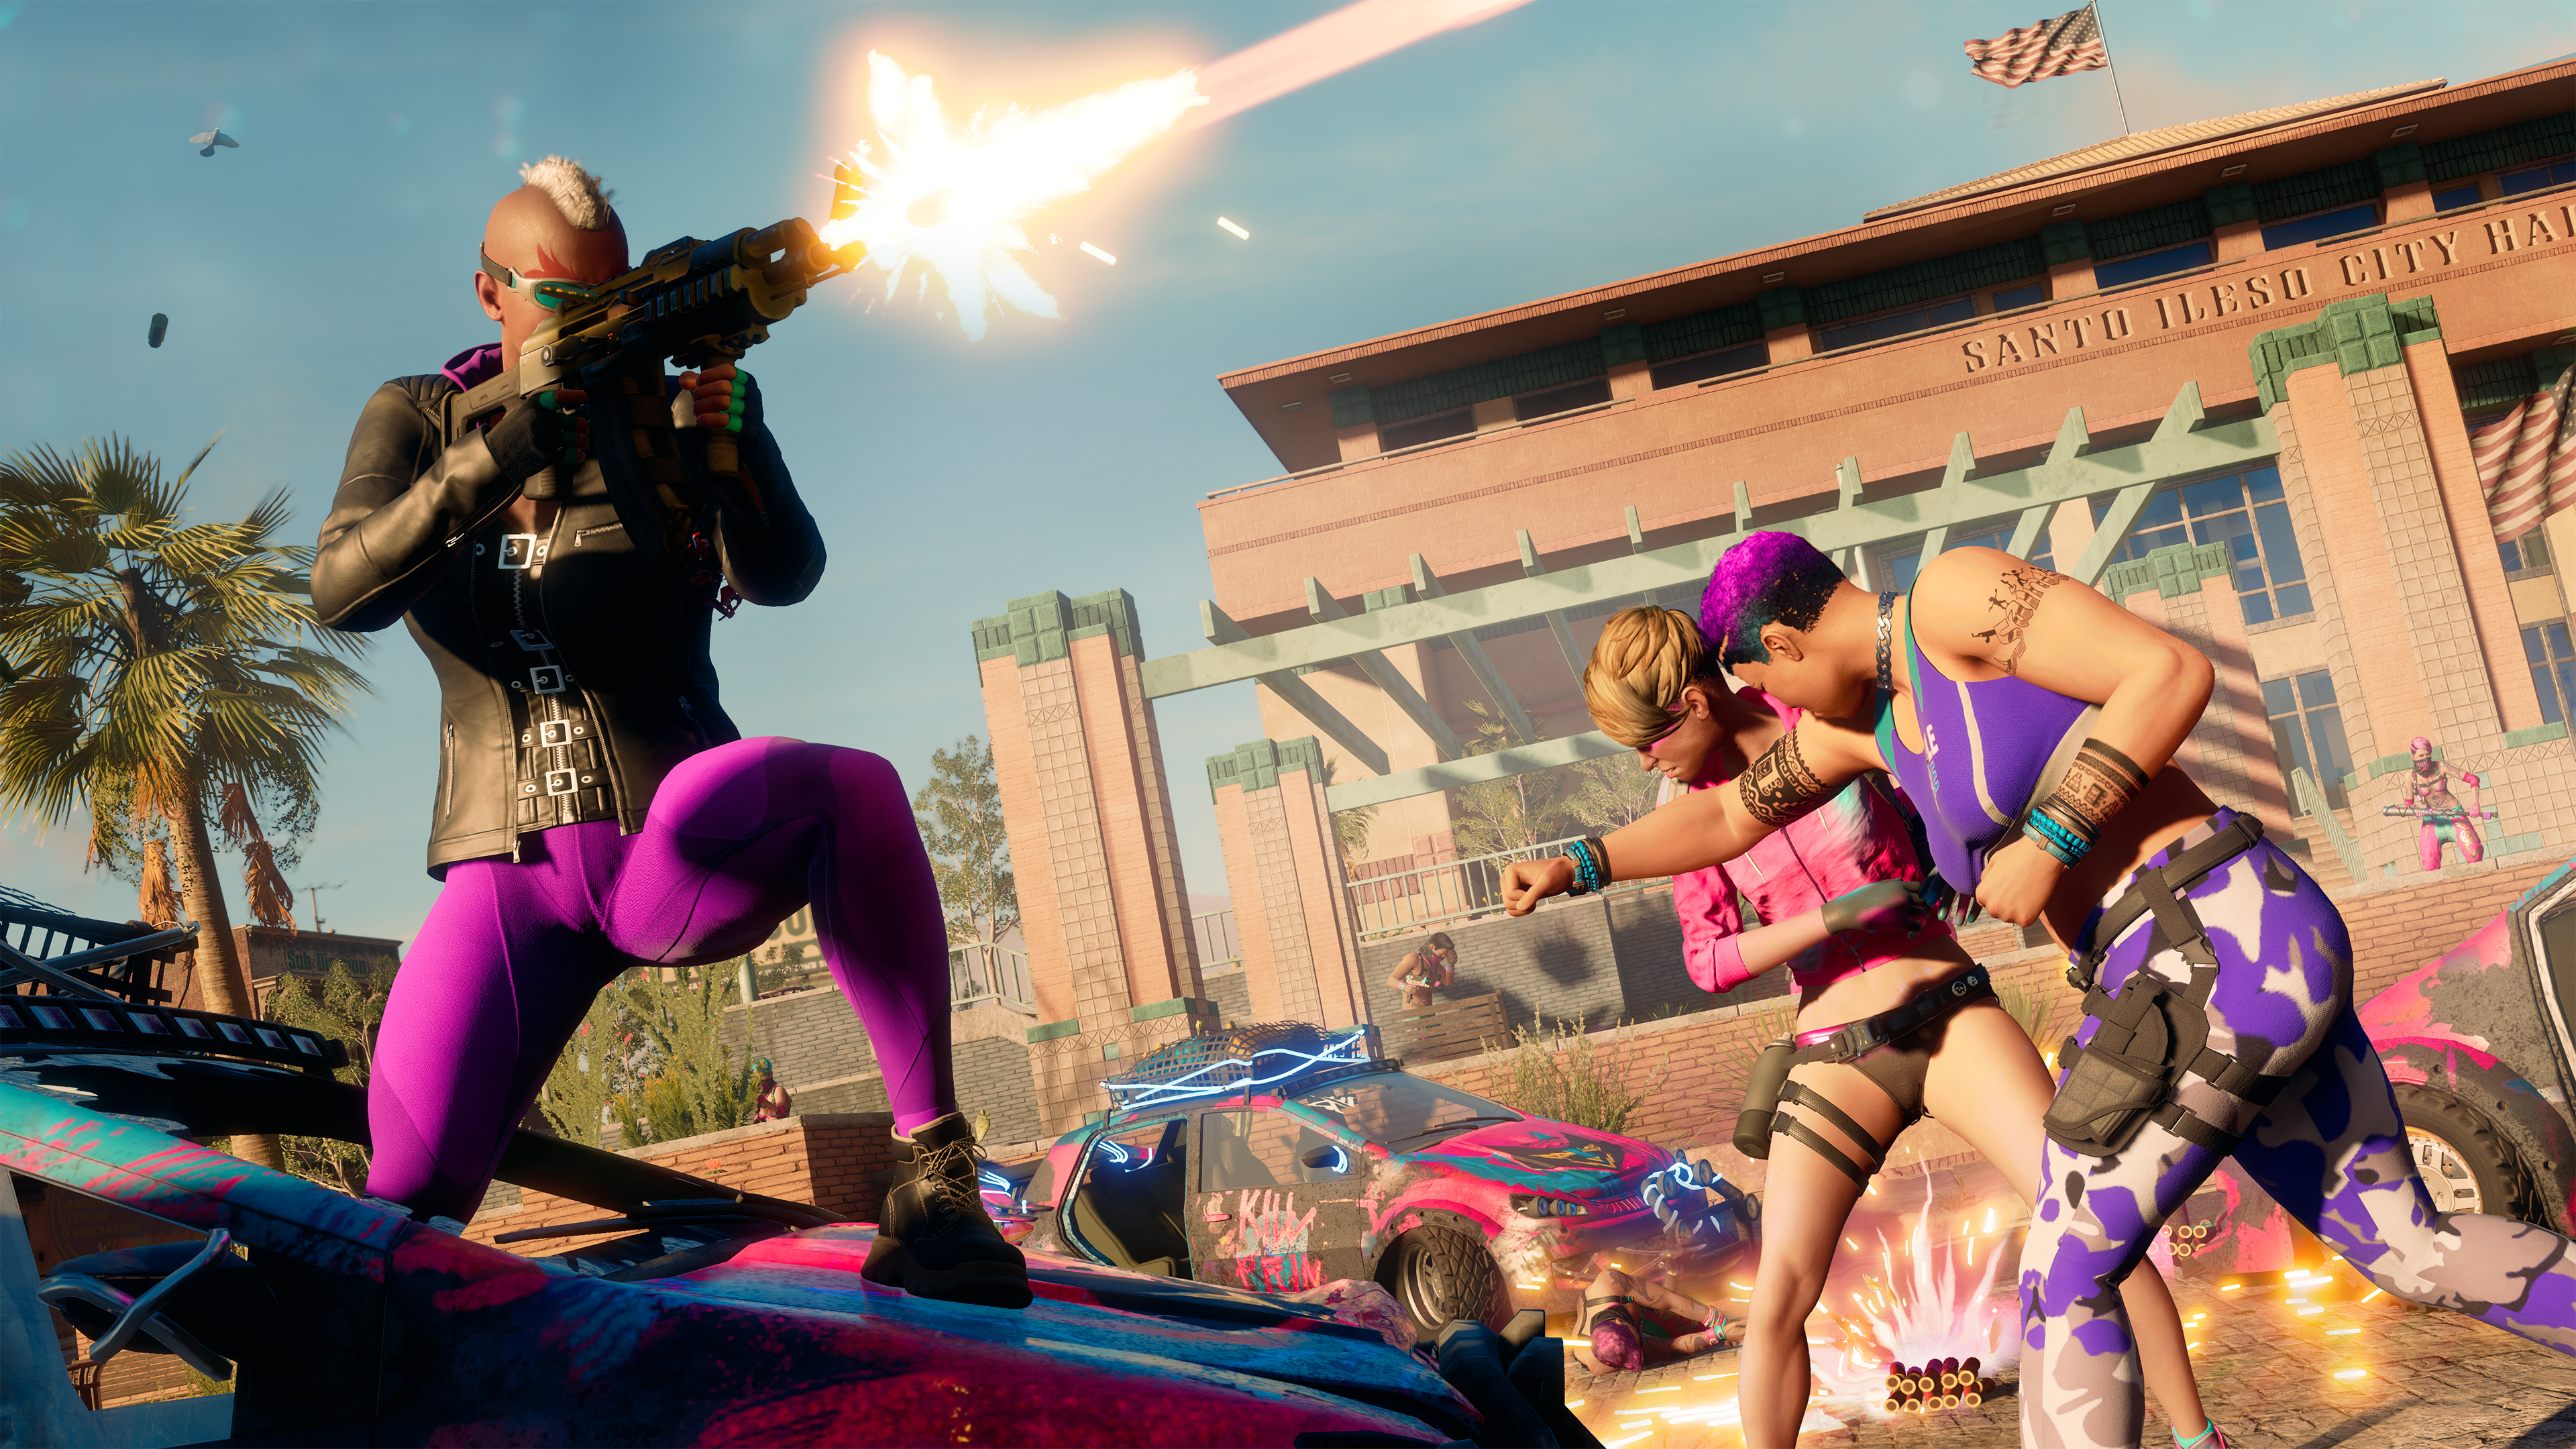 A shooter fires a gun on the roof of a car while two men have a fistfight nearby in a screenshot from Saints Row (2022).